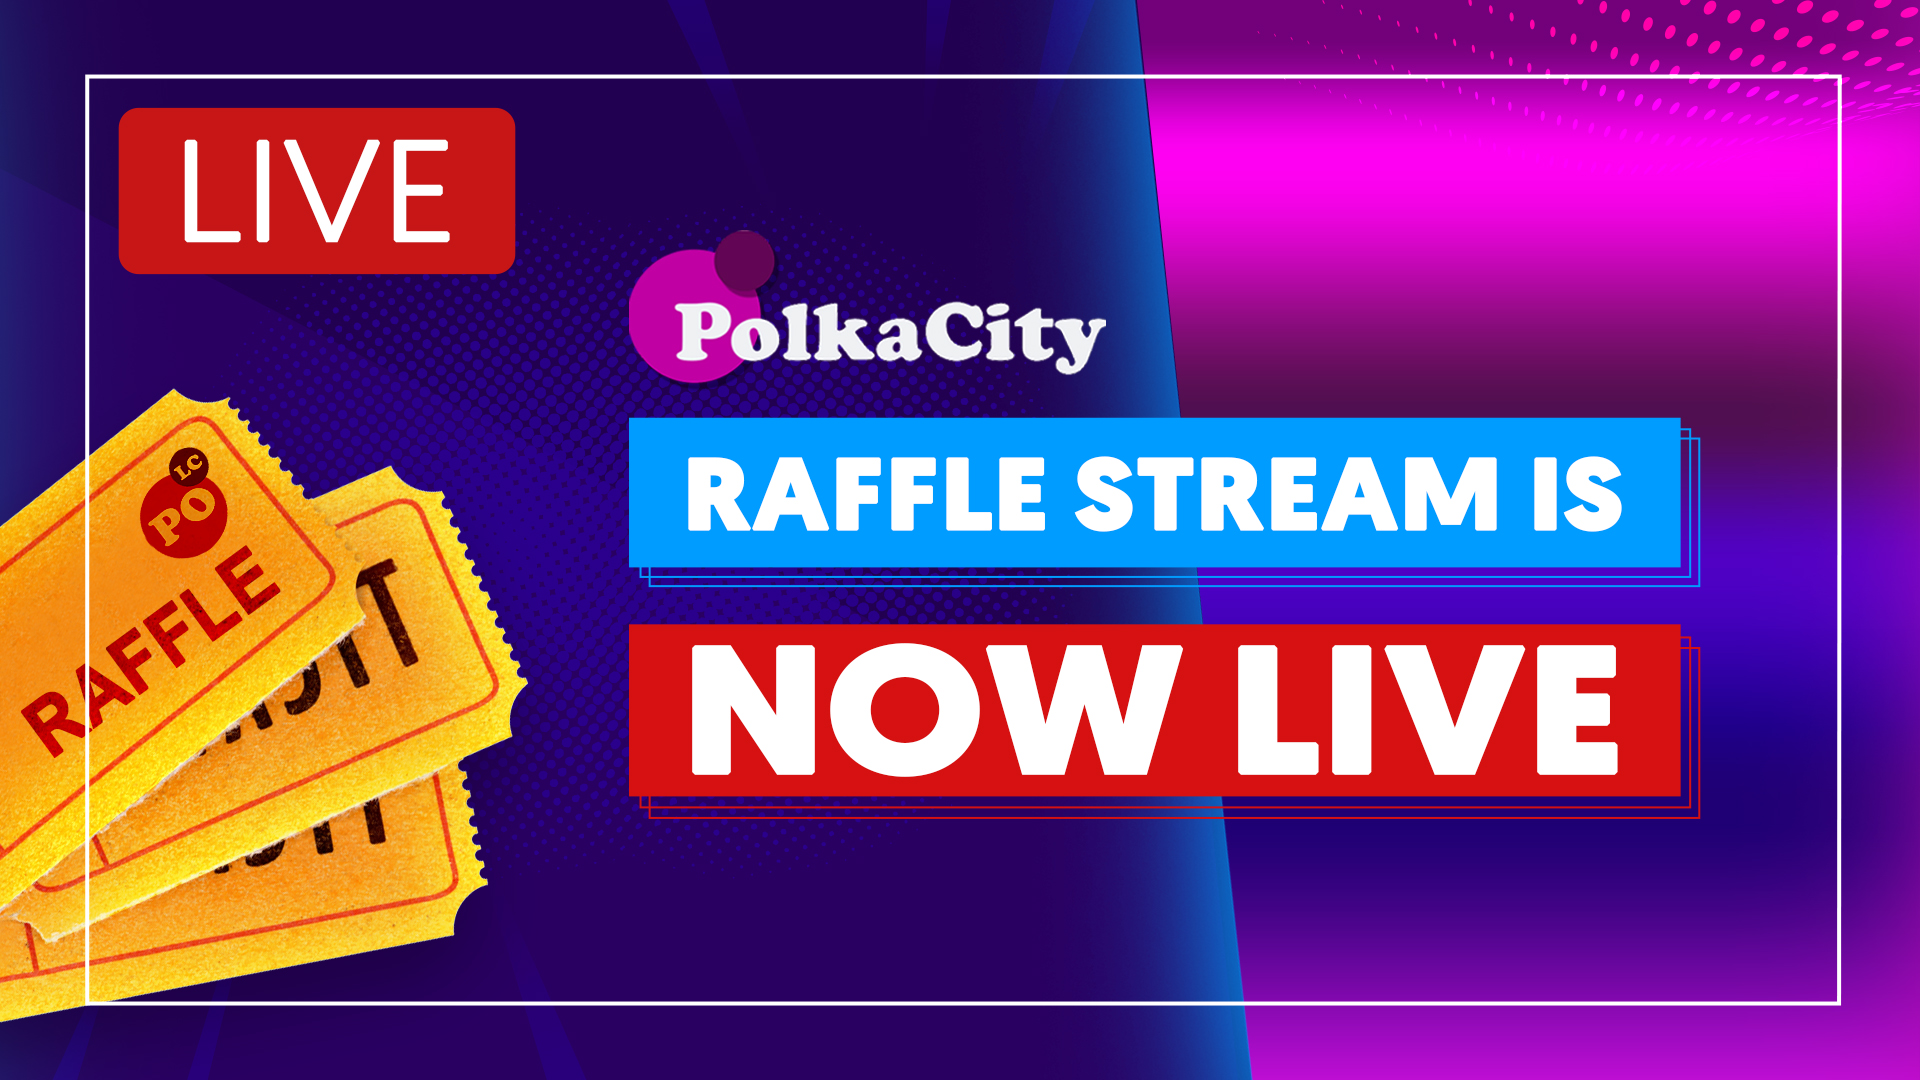 The Polkacity NFT Raffle Livestream is now live 📢  Good luck 🍀 to our viewers and Polkacity Citizen’s   Watch Live Now - For your chance to win 🎁  [twitch.com]  #MetaverseNFT #free #Giveaways #GameFi #NFTCommumity #polkacity #polc #BinanceSmartChain #contest [twitter.com] [pbs.twimg.com]